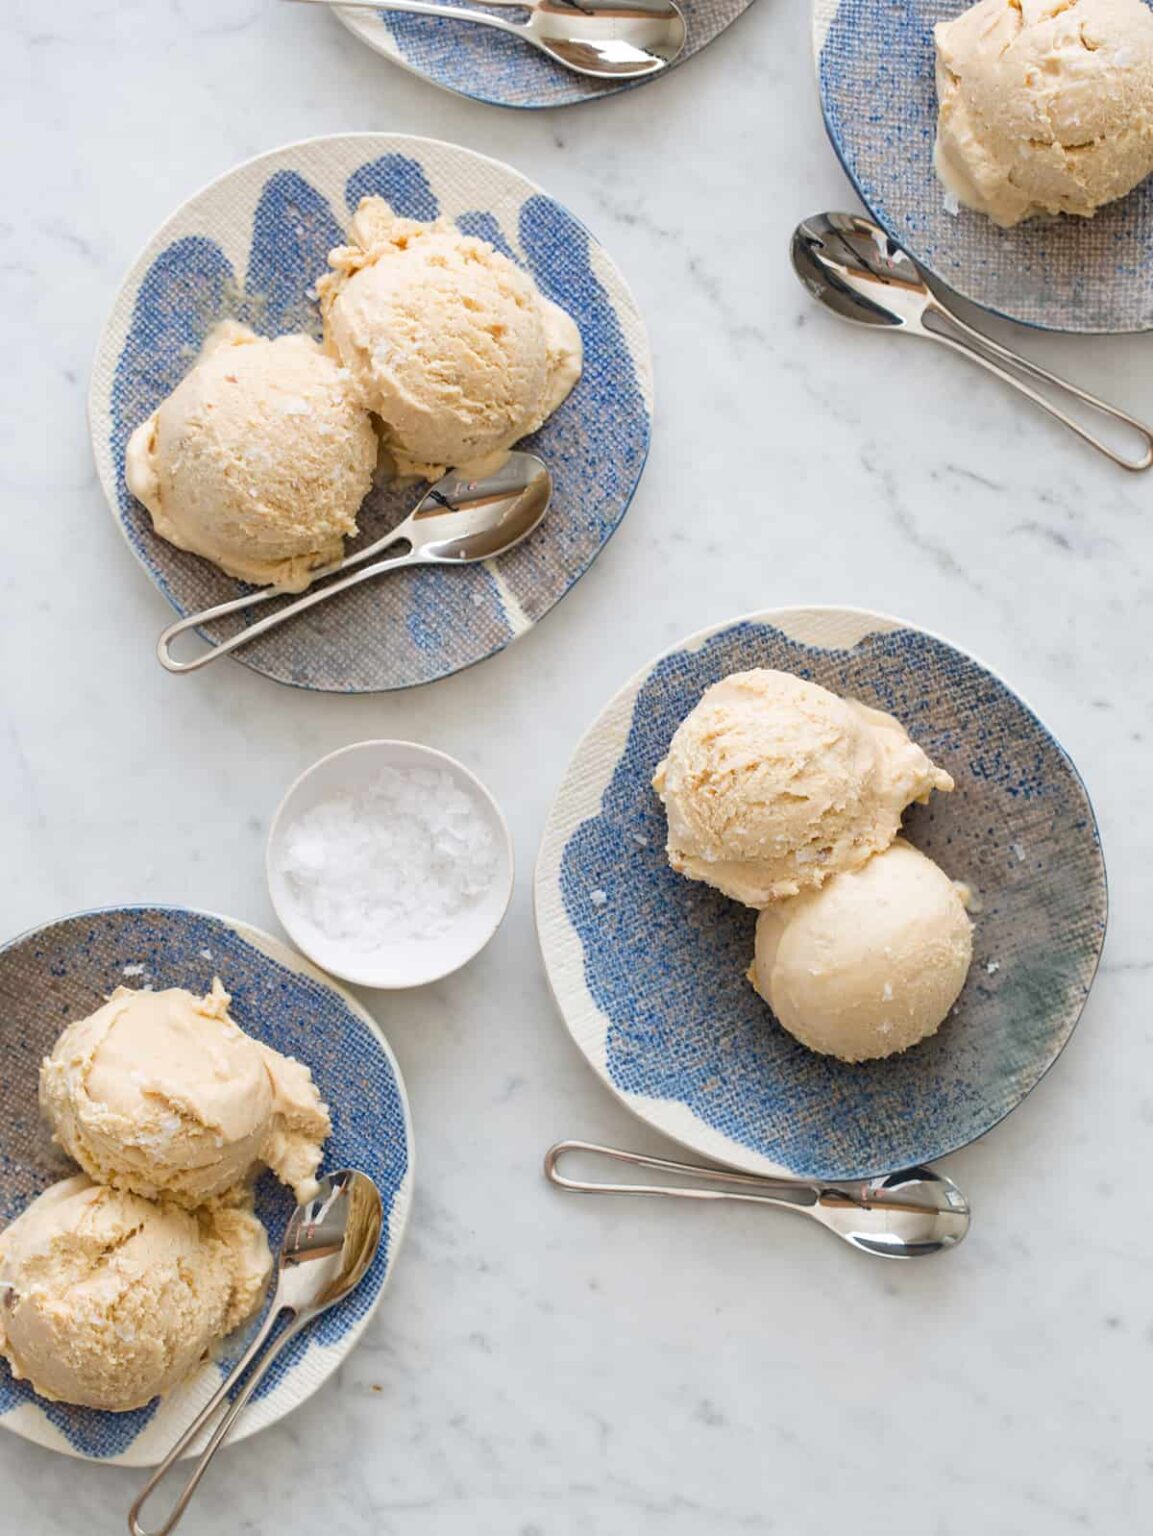 Salted Caramel and Candied Bacon Ice Cream | Spoon Fork Bacon